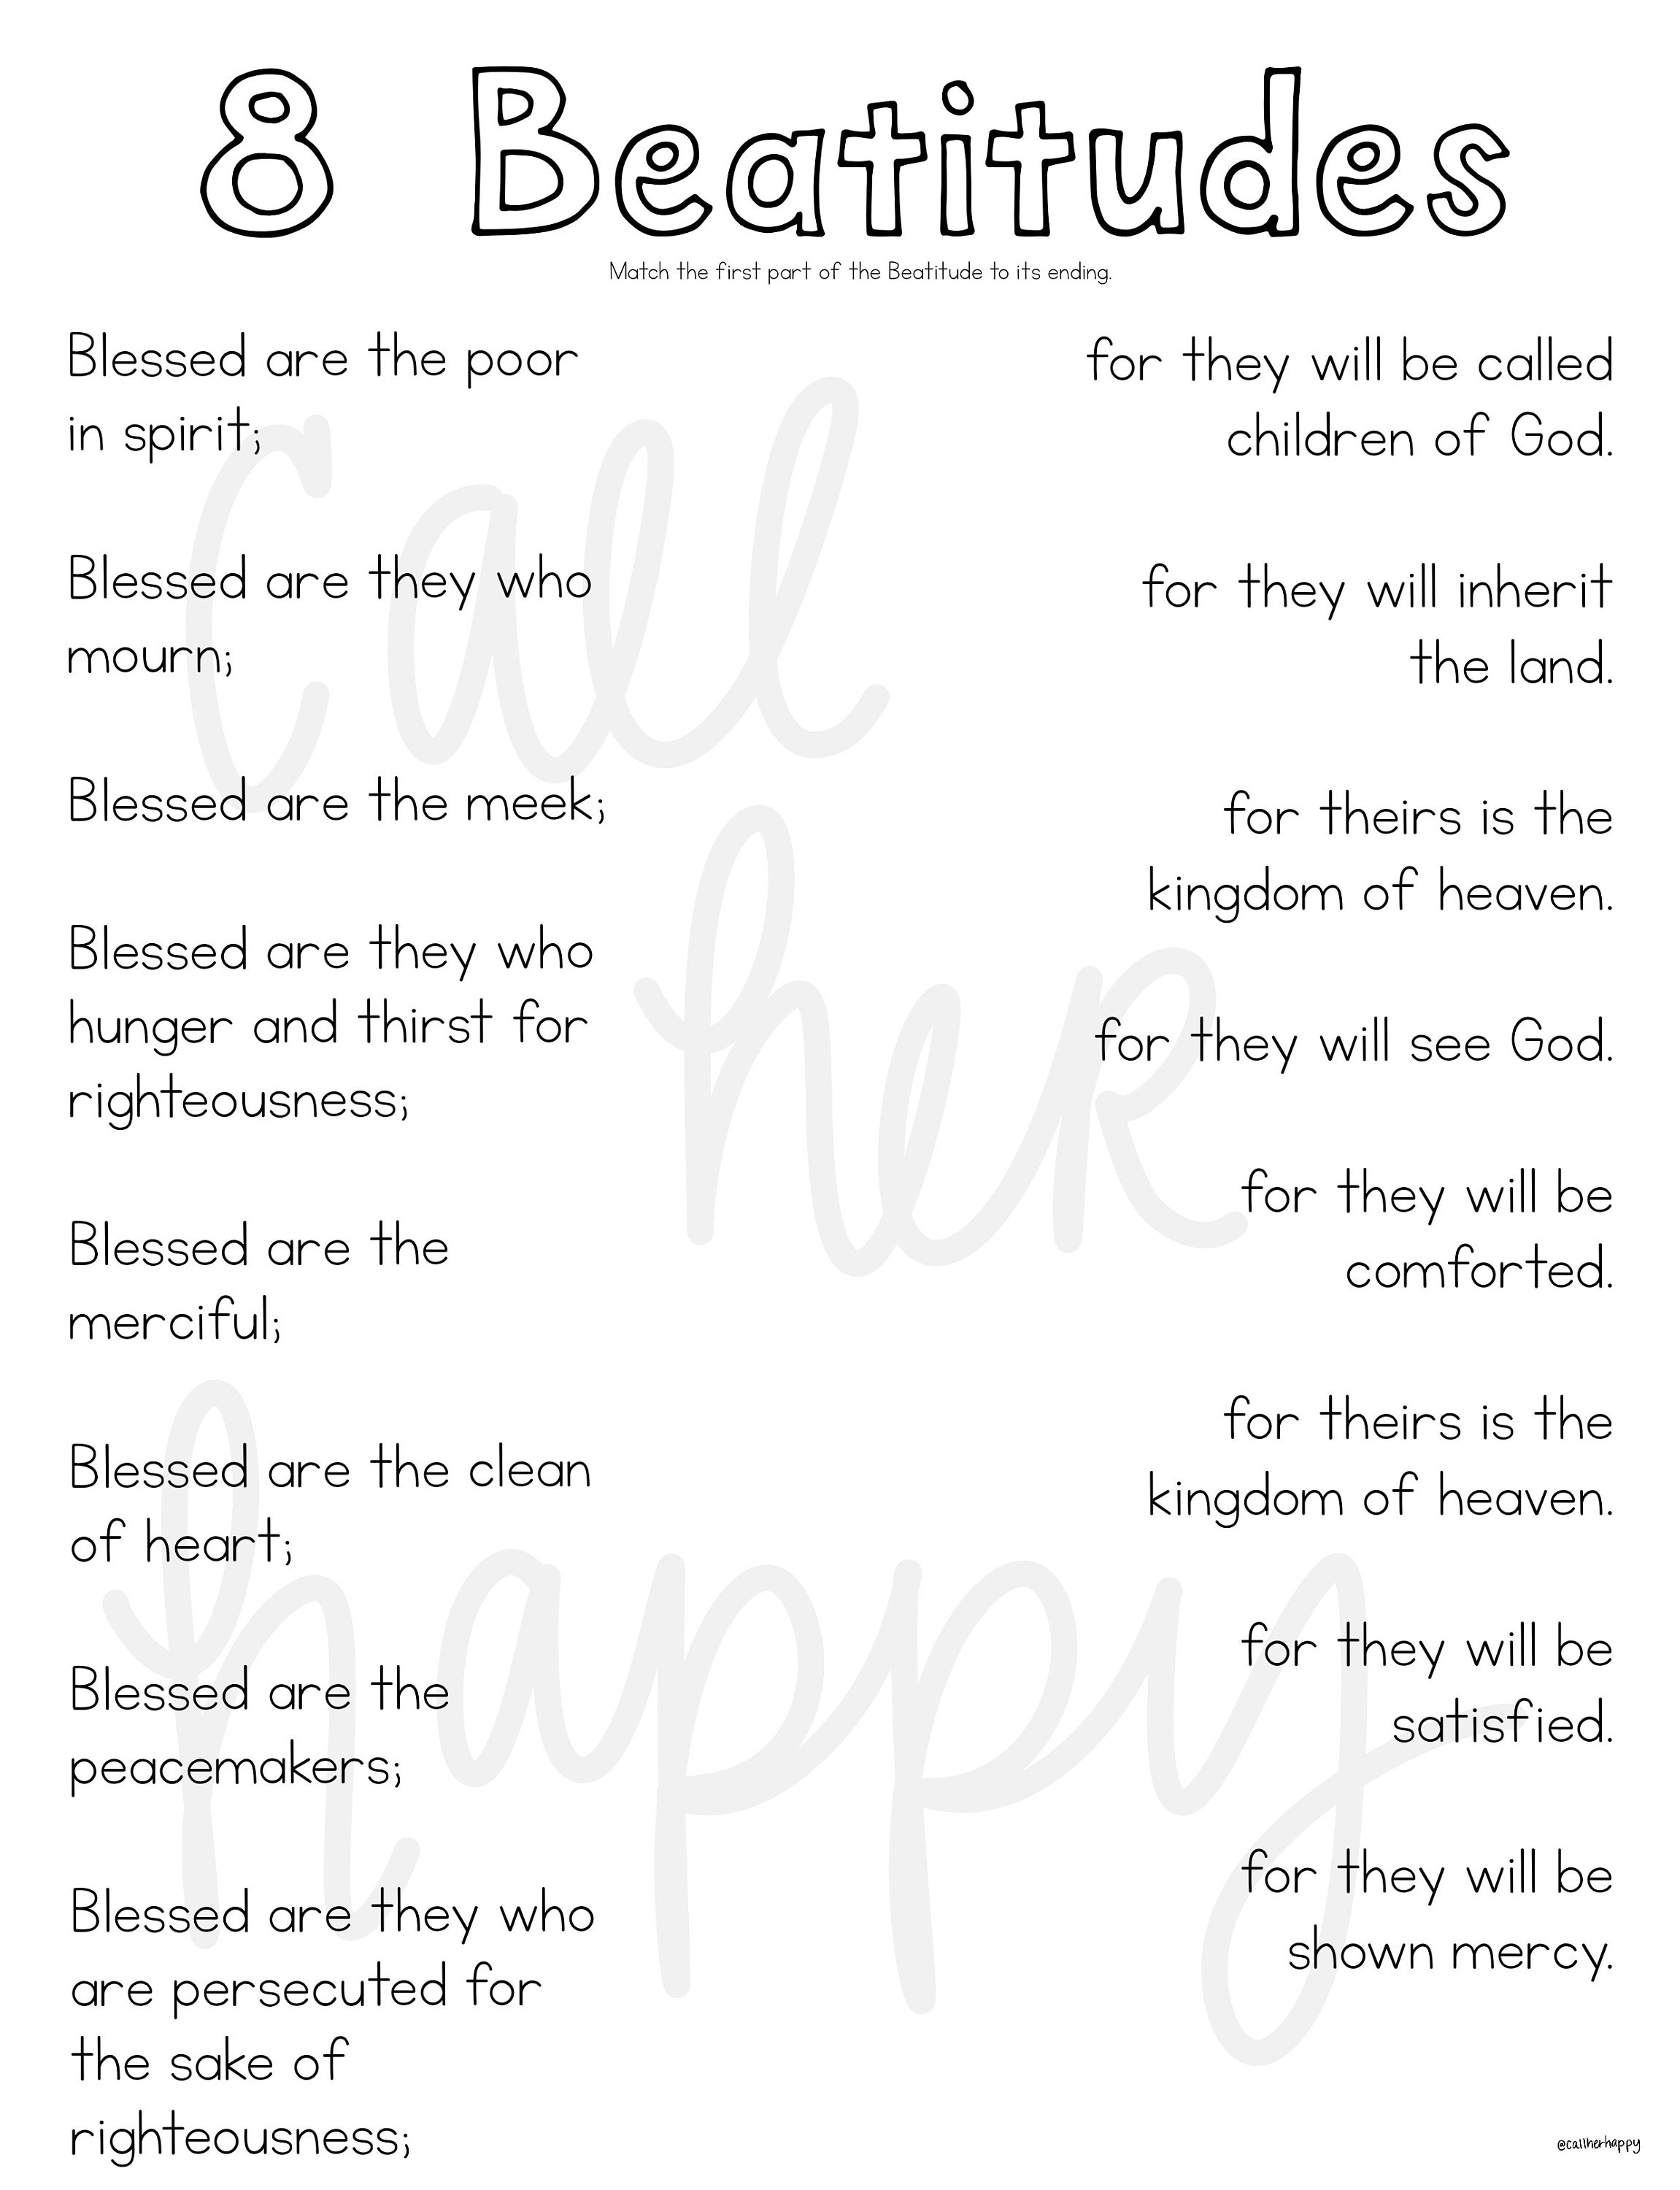 Beatitudes worksheet printable coloring page sheet liturgical year catholic resources for kids feast day prayer activities jesus instant download